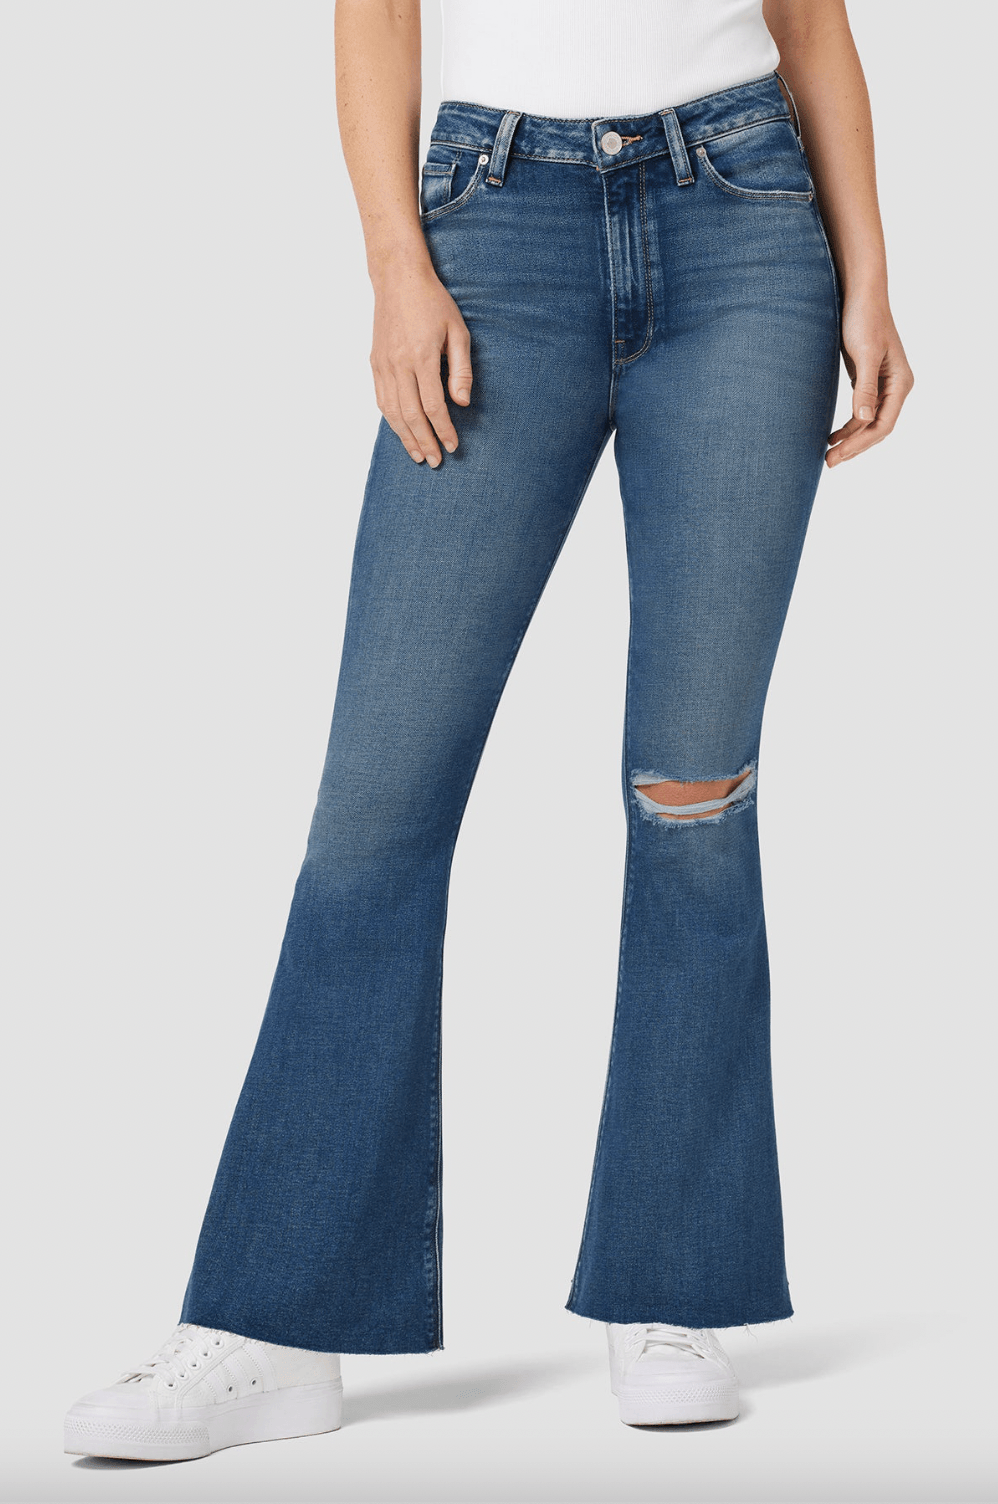 Holly High Rise Flare Jeans in Barefoot by Hudson